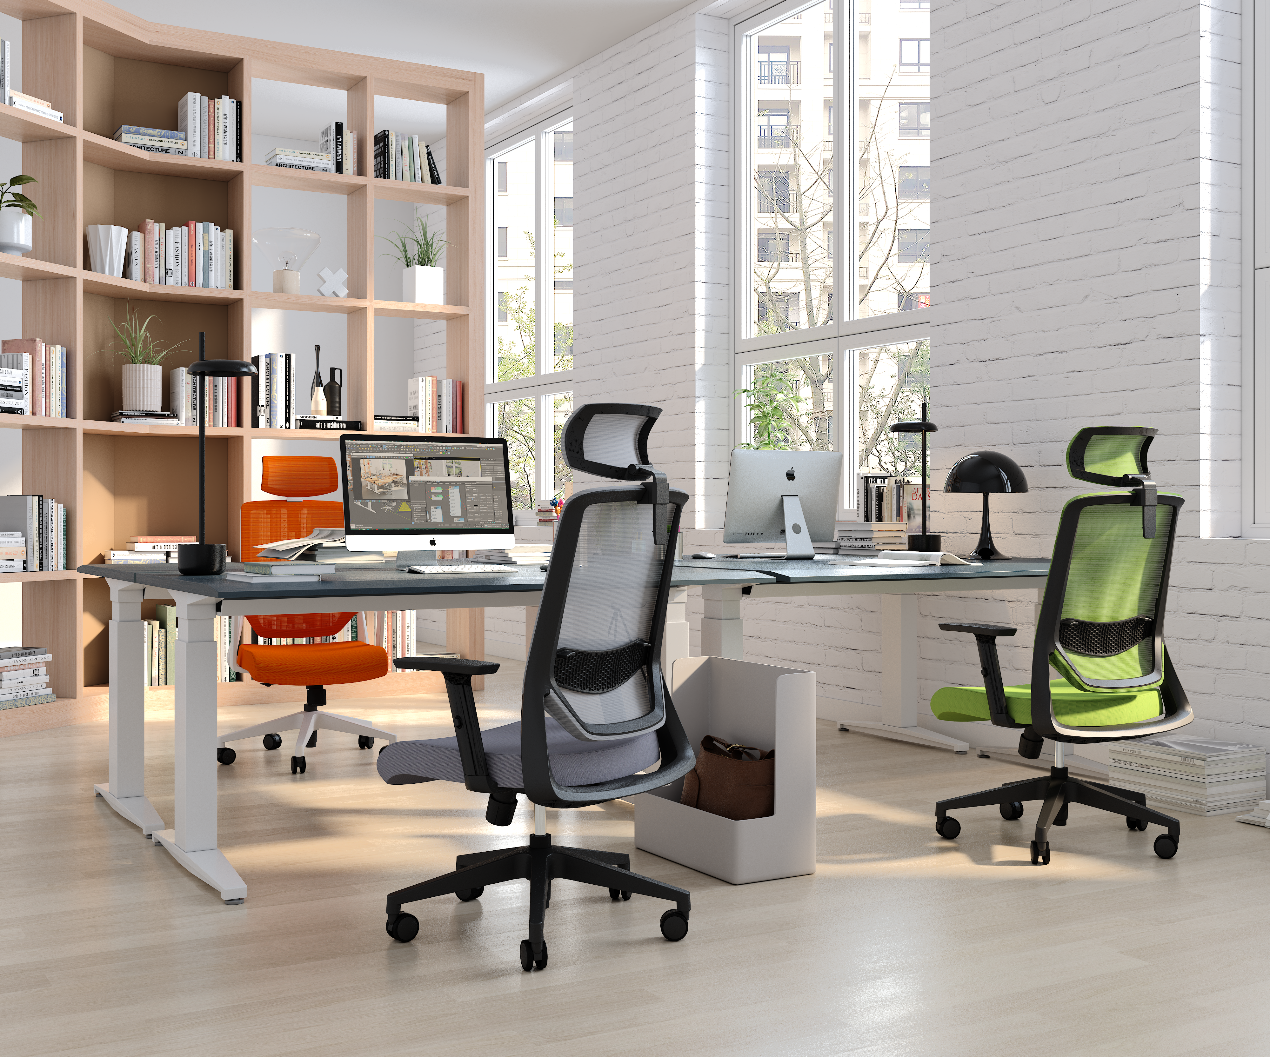 How to choose the color of the office chair?